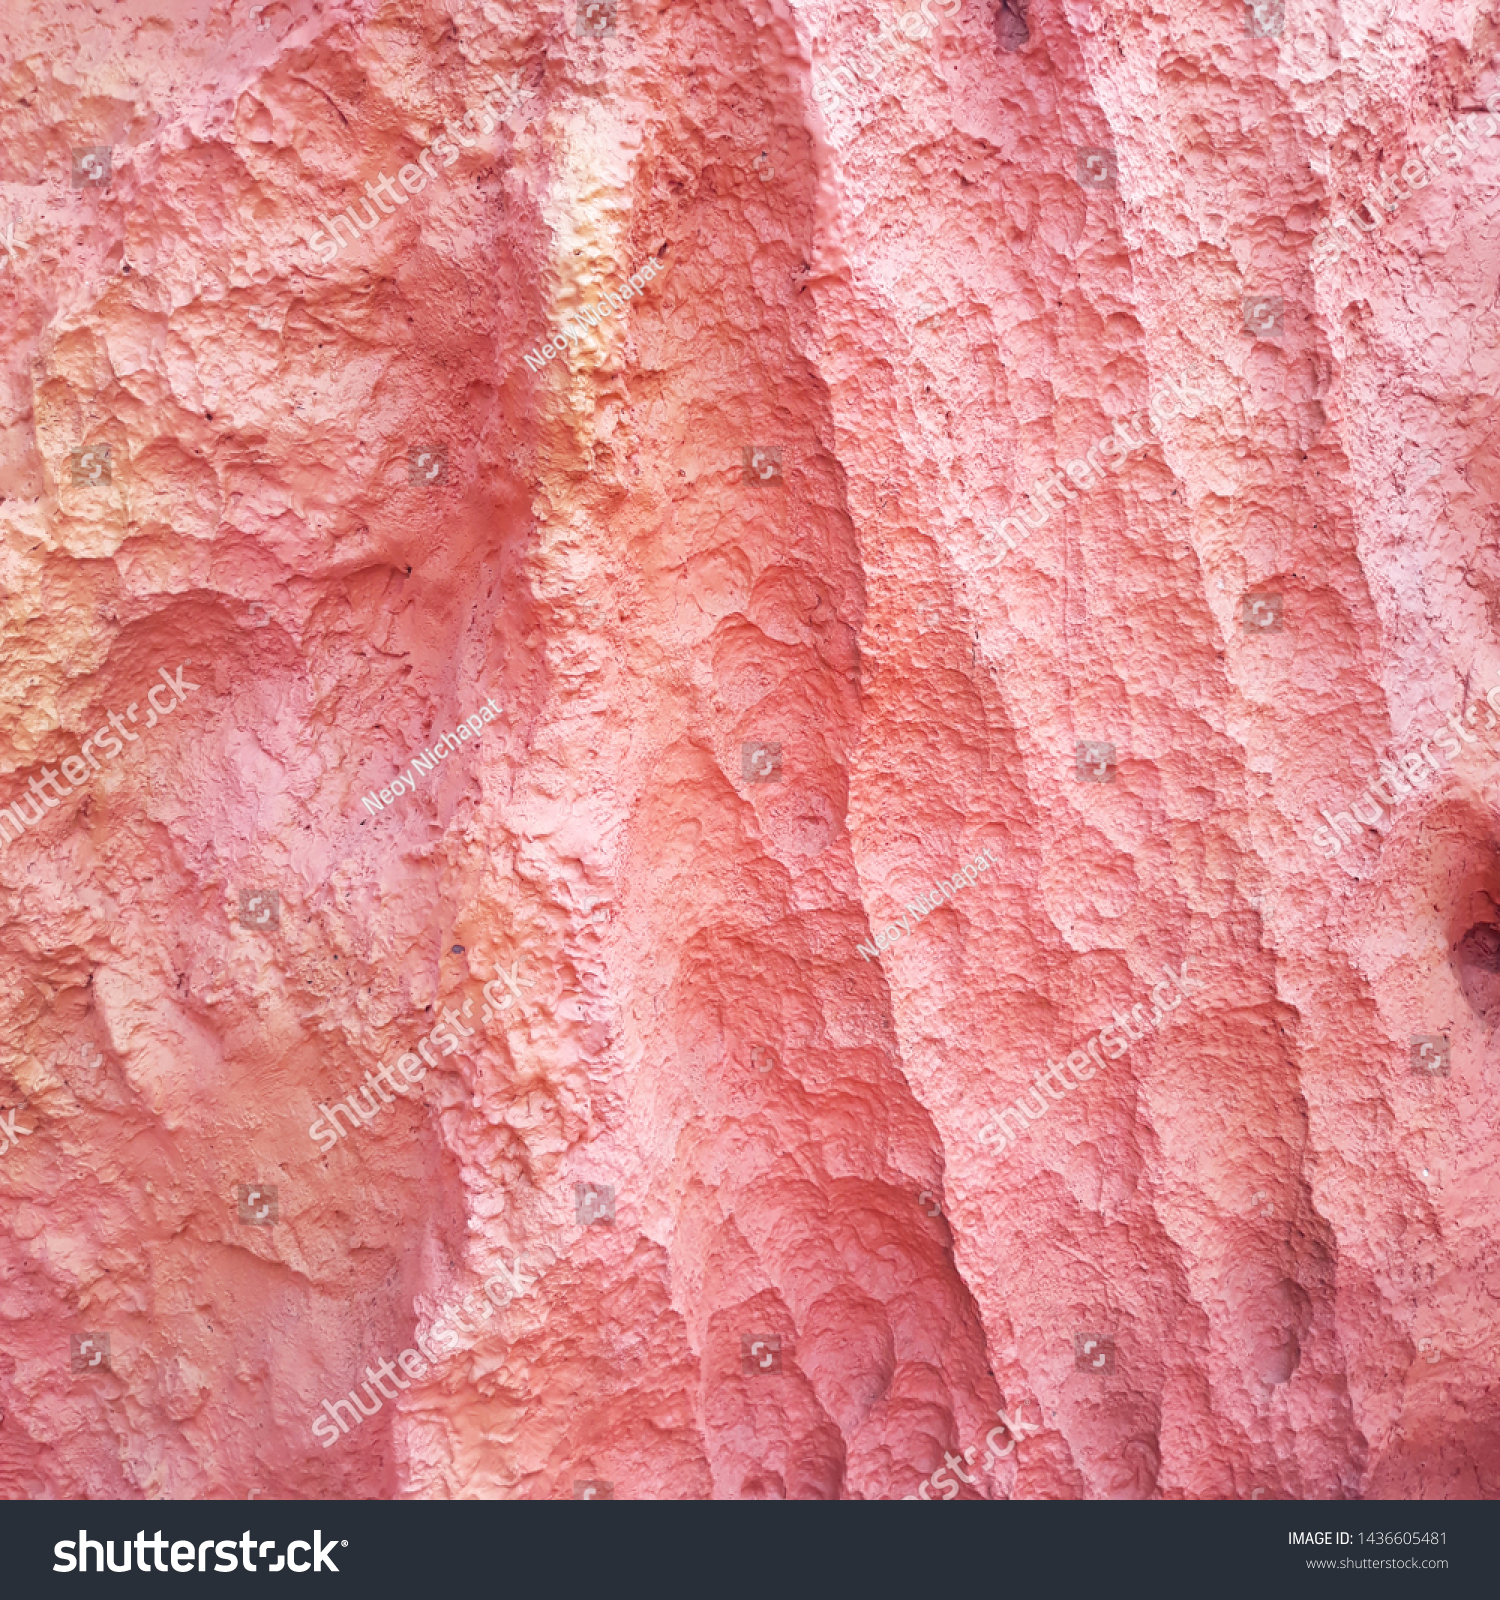 Rock layers - a colorful formations of rocks stacked #1436605481